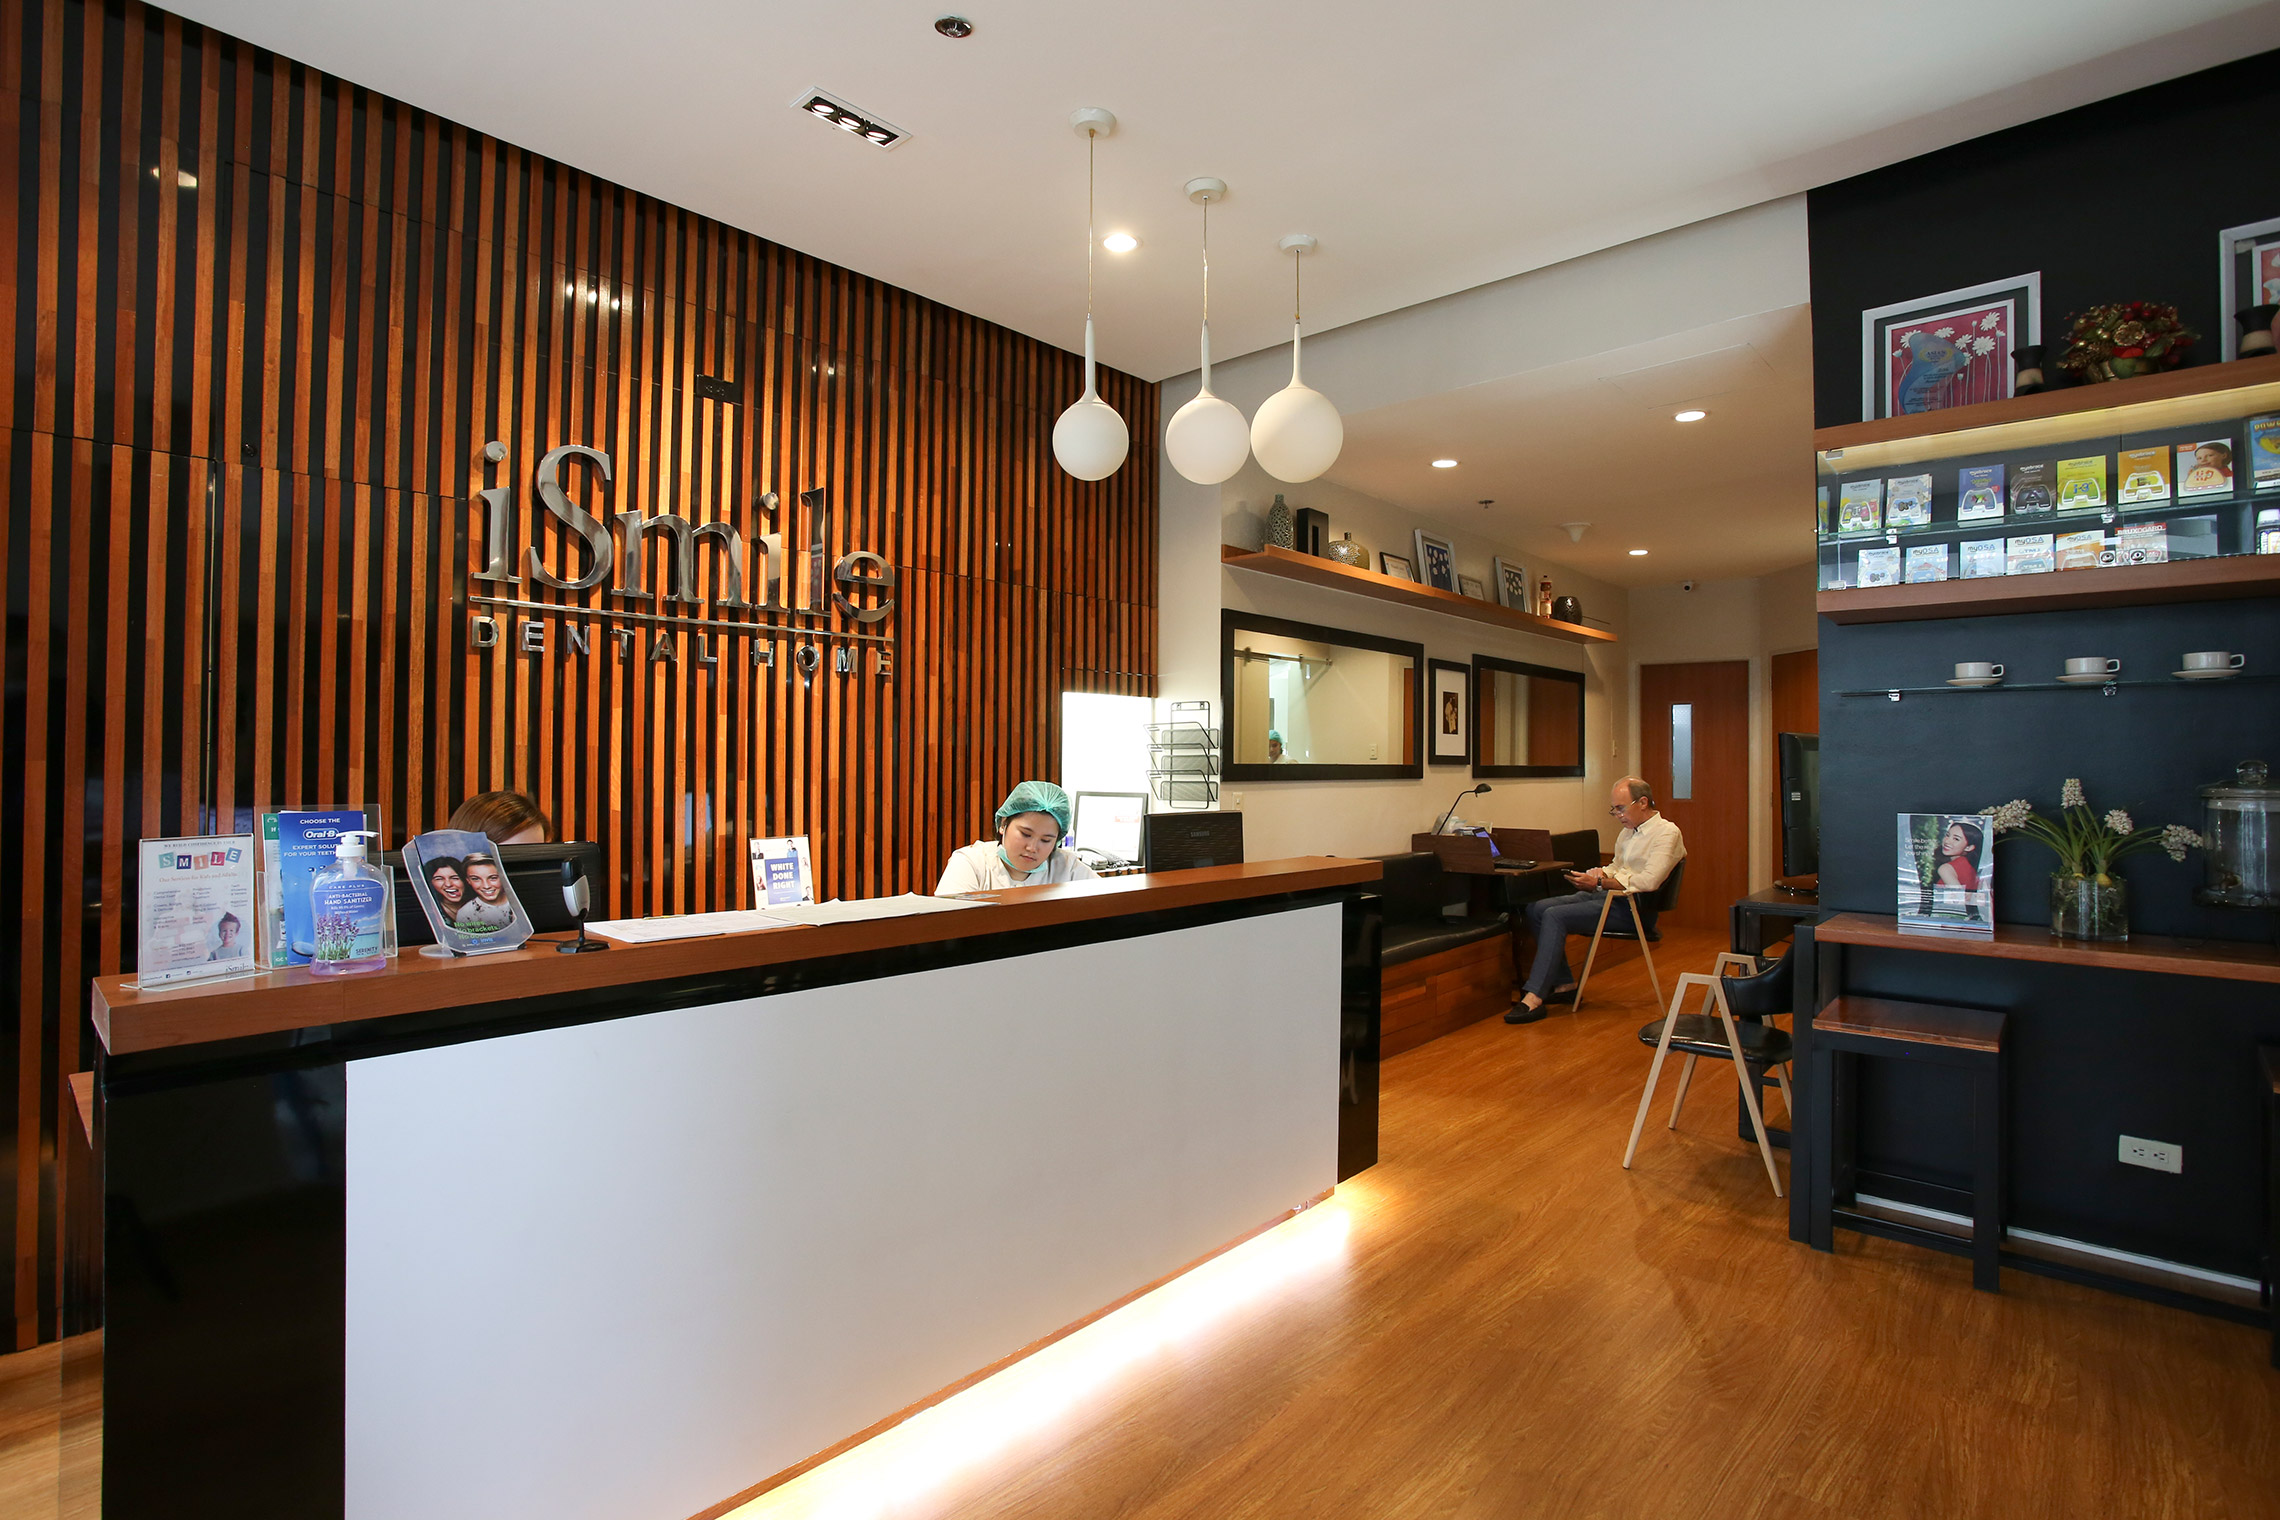 iSmile Dental Home | Facilities - Reception and Hallway